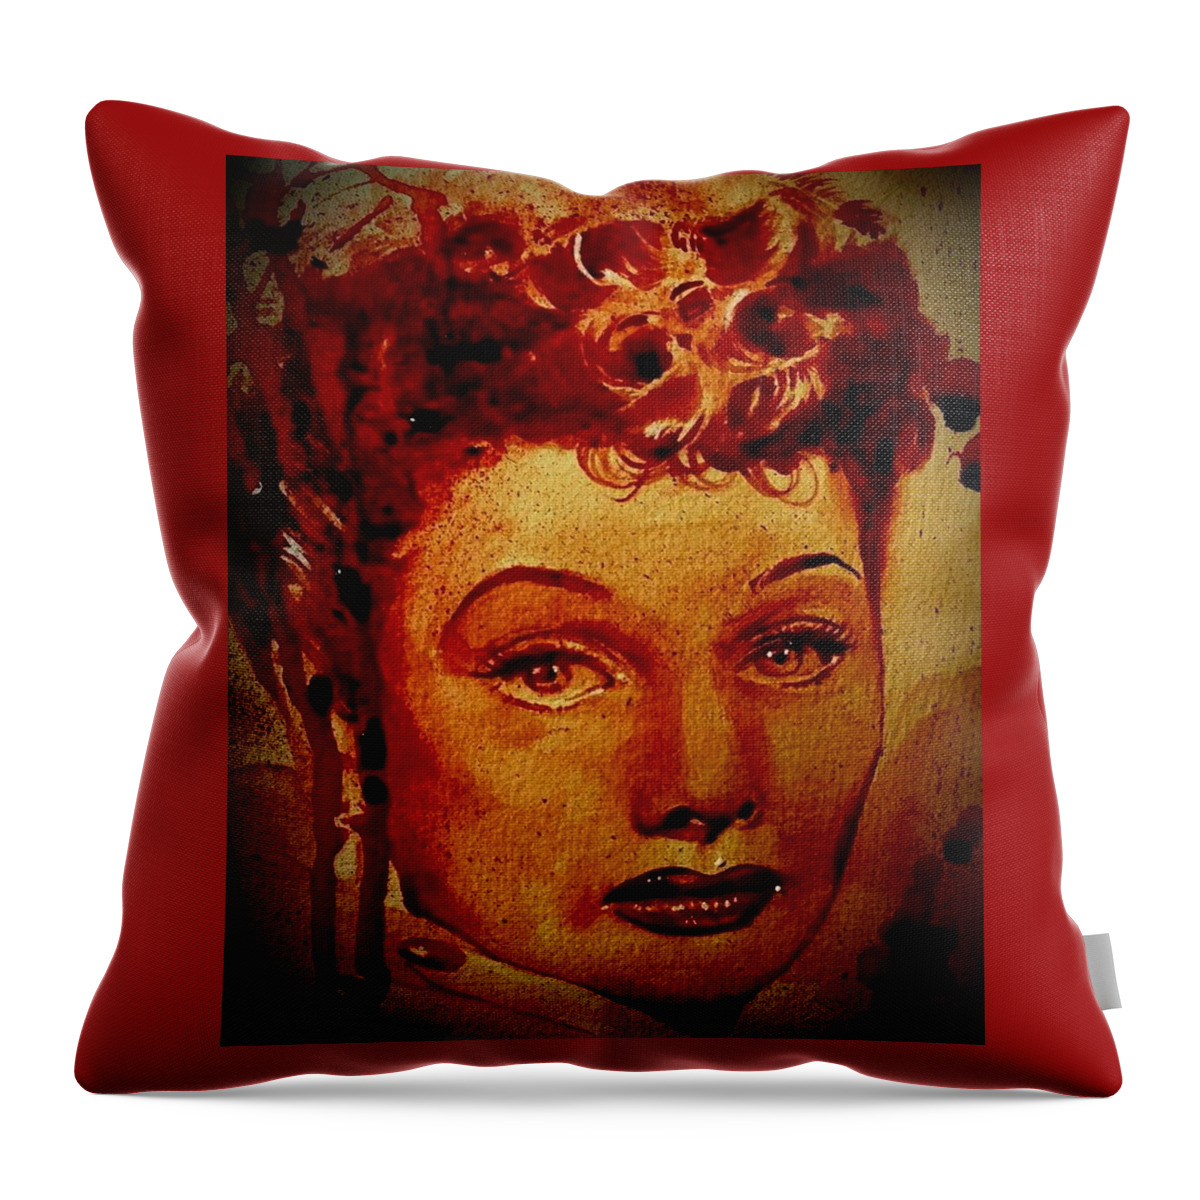  Throw Pillow featuring the painting Lucille Ball by Ryan Almighty